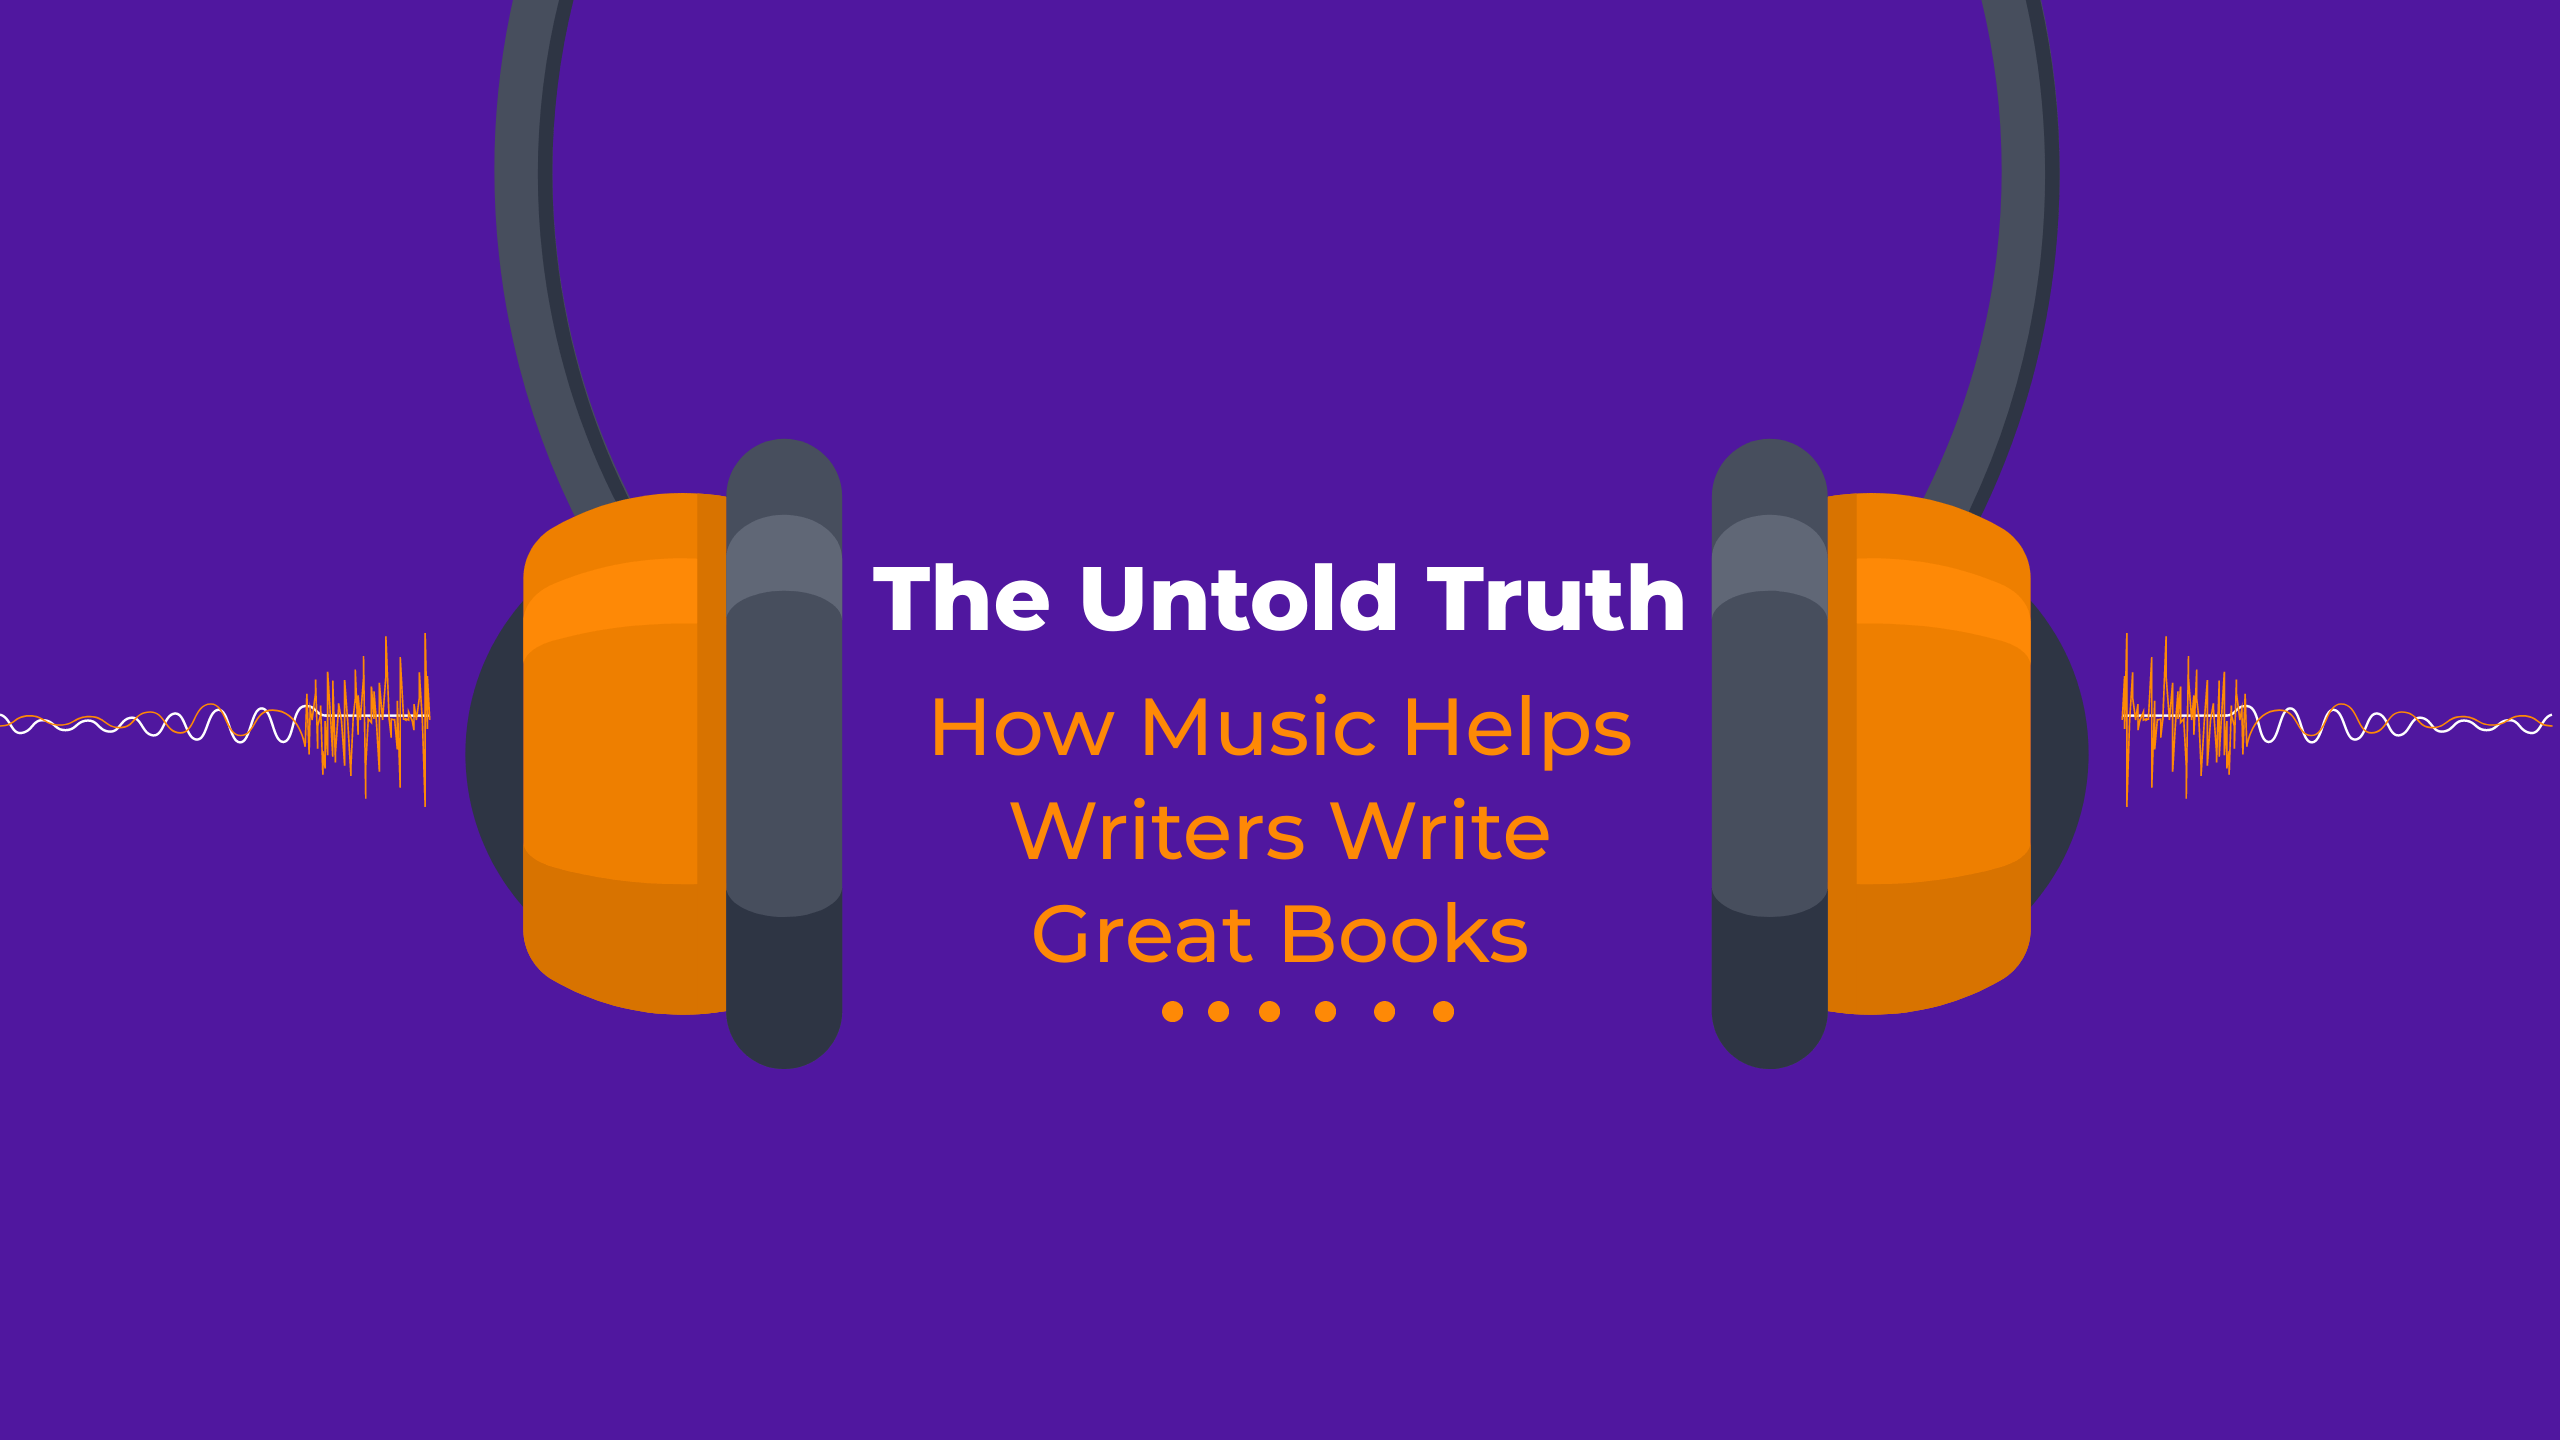 The Untold Truth: How Music Helps Writers Write Great Books